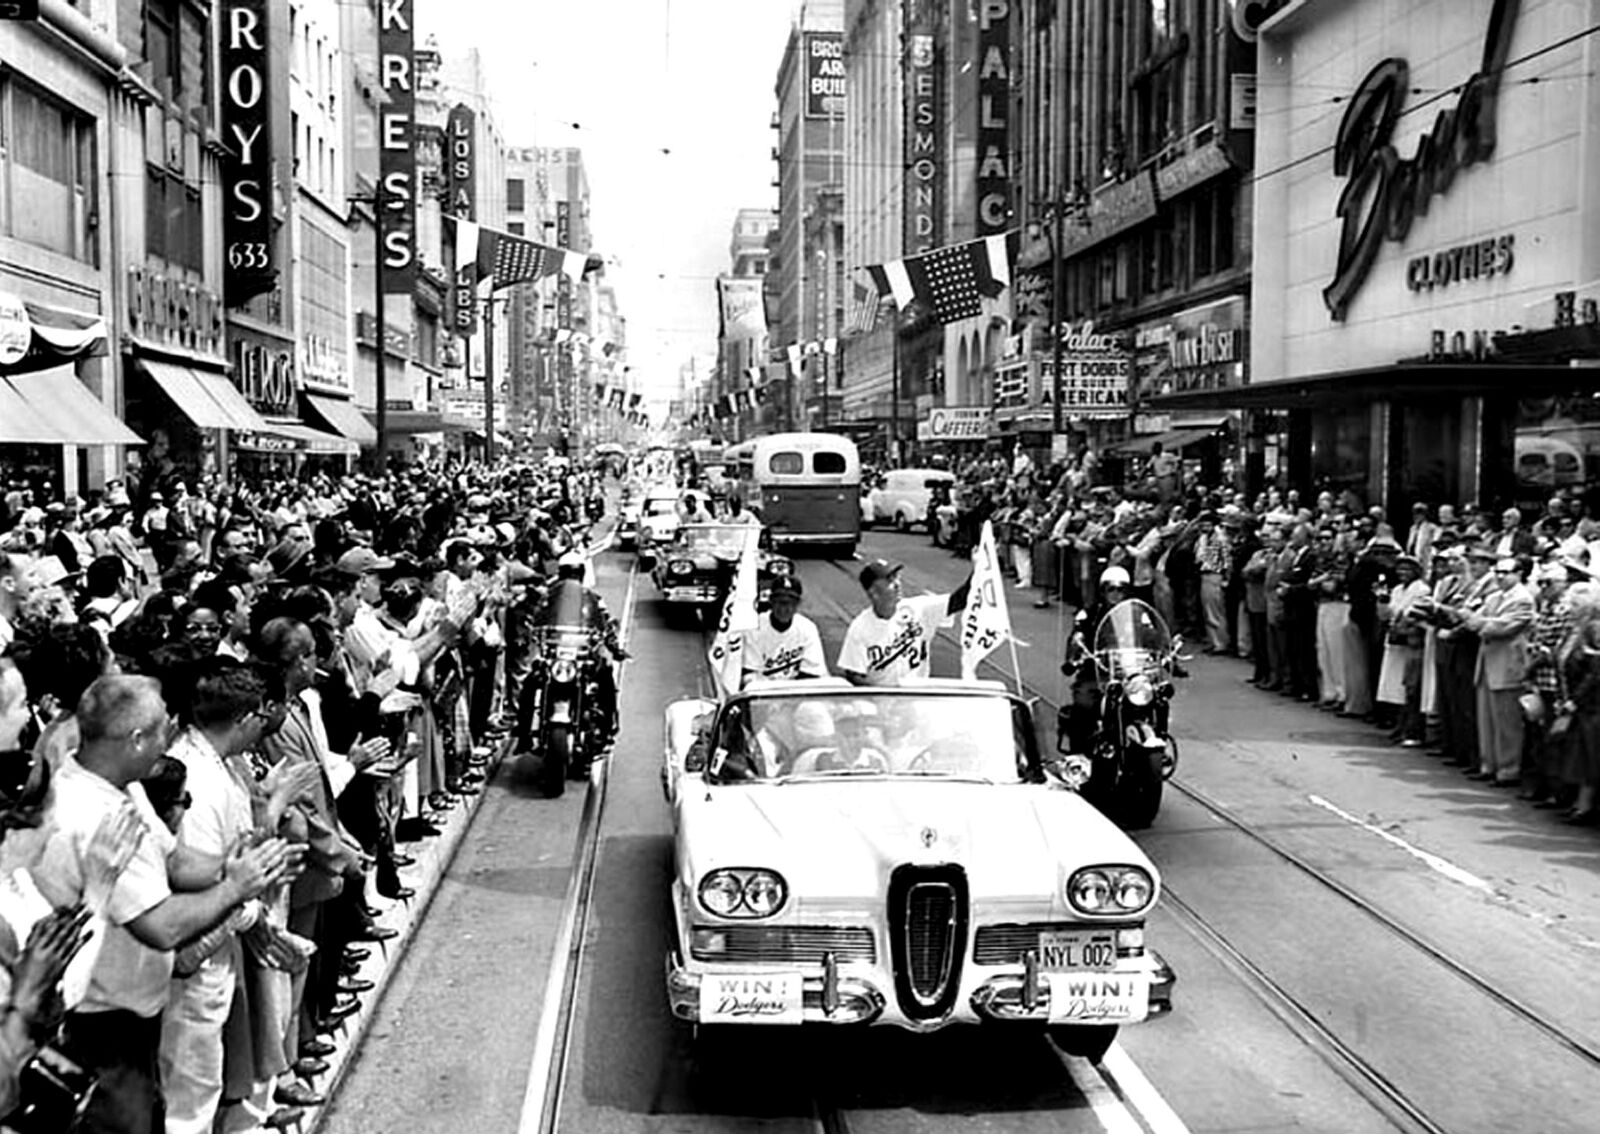 1958 DODGERS Arrival in Los Angeles PARADE Photo EDSEL (174-x )